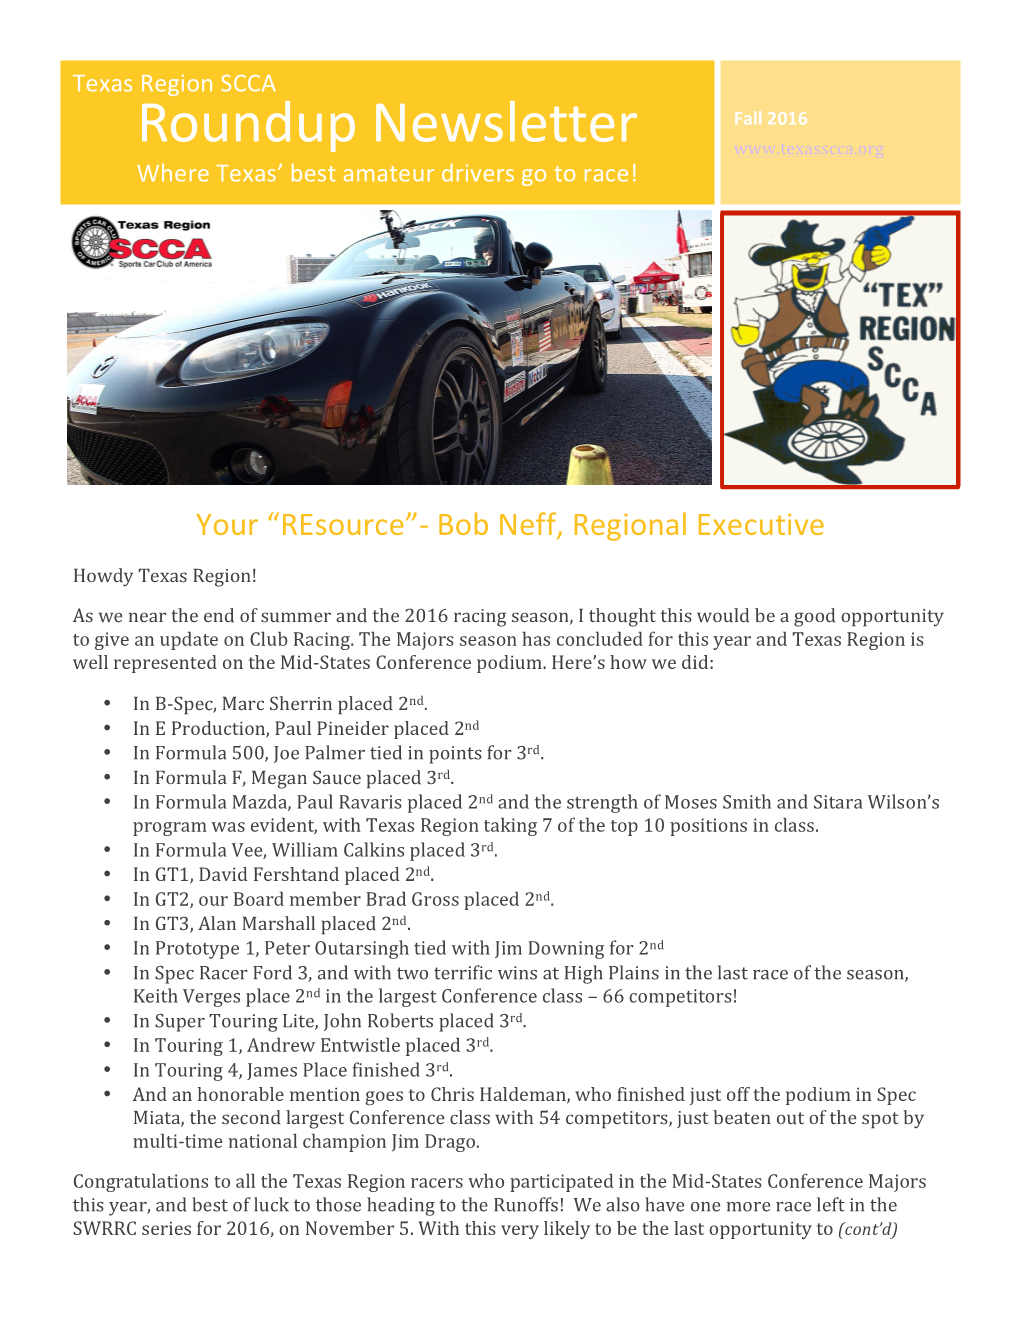 Roundup Newsletter Where Texas’ Best Amateur Drivers Go to Race!